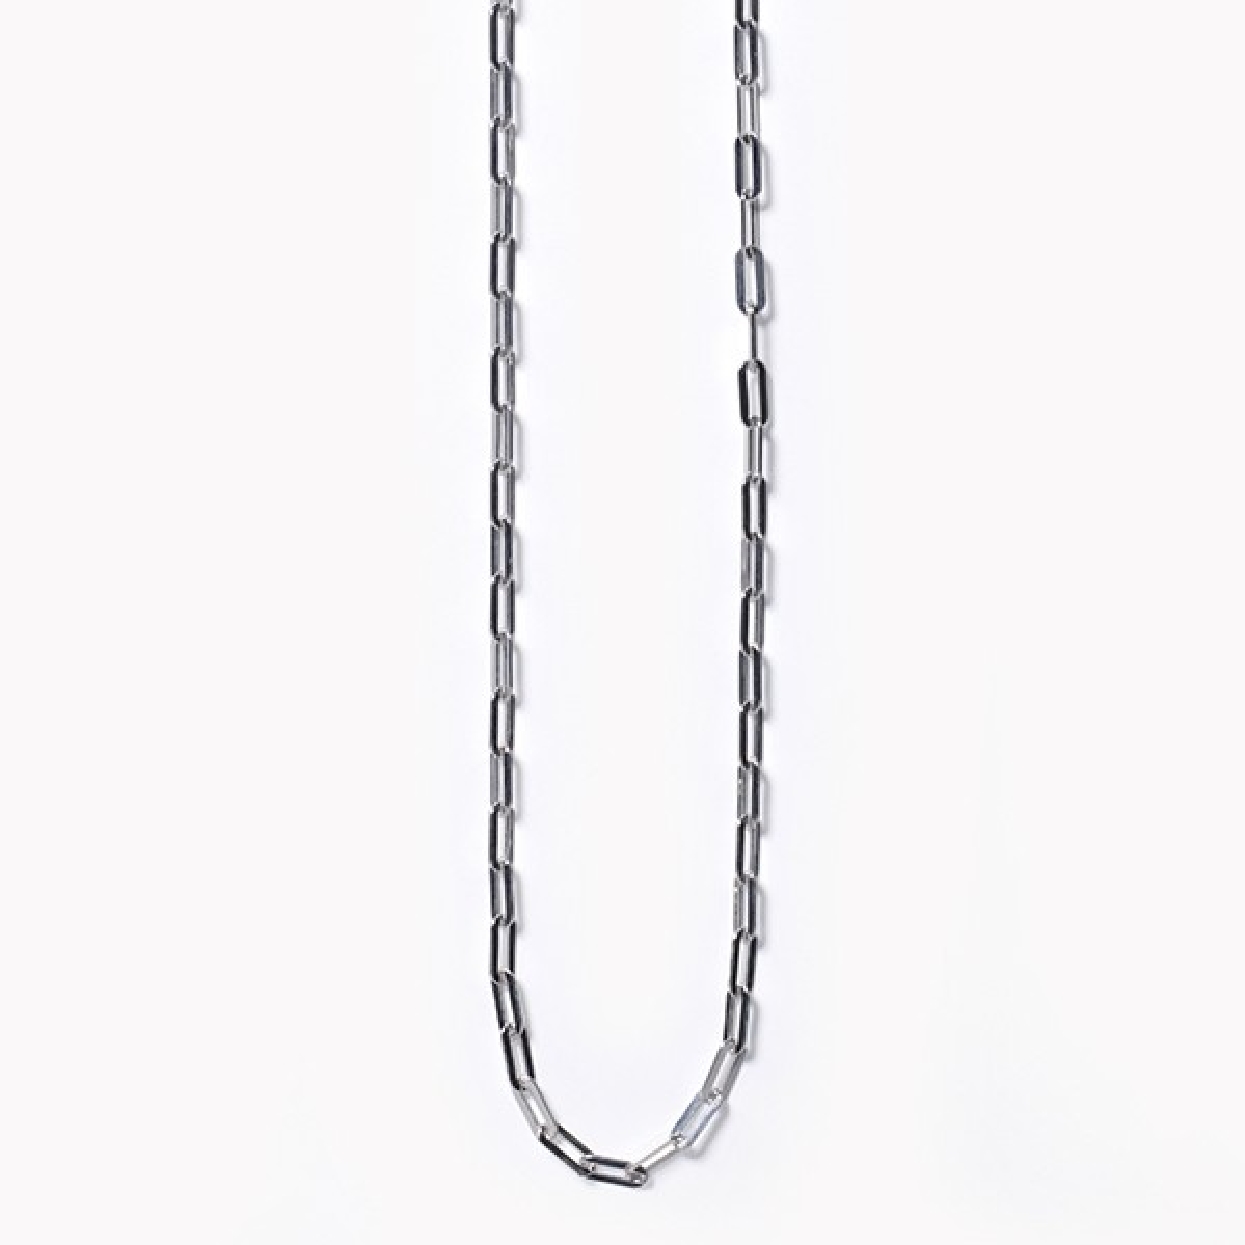 Southern Gates Sterling Silver Contemporary Rectangle Paperclip Necklace; 16 inches

KAR603/16